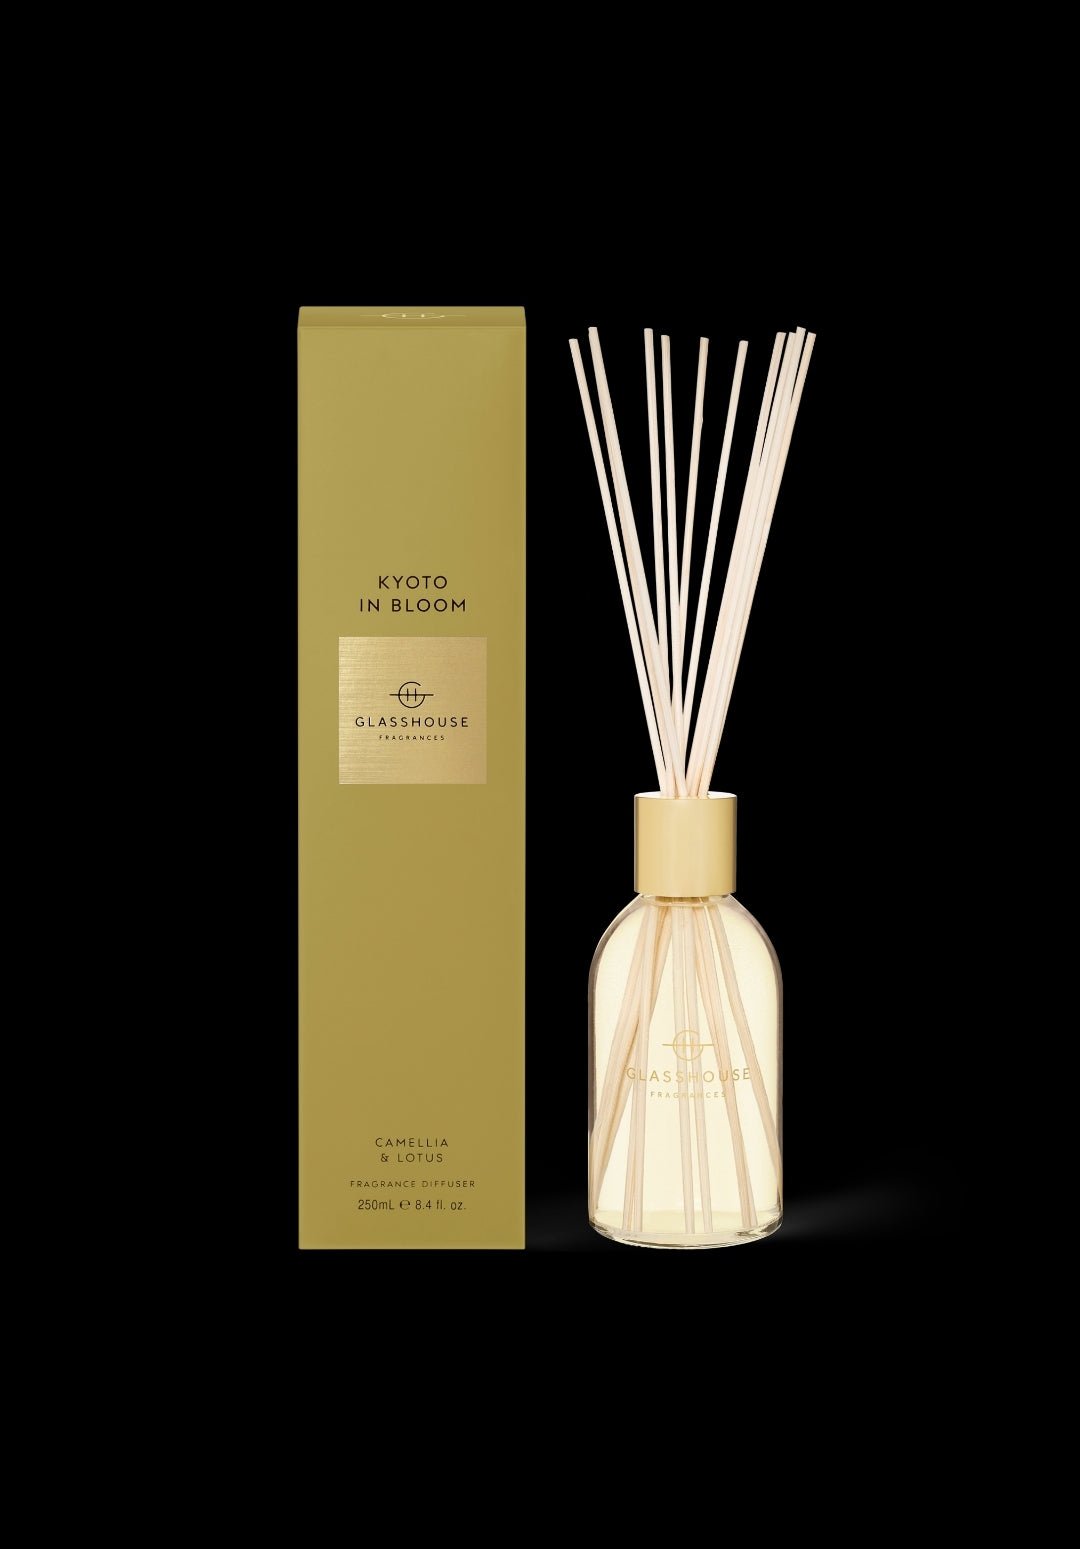 Glasshouse Diffuser + Candle Duo Gift Pack Kyoto in Bloom - Exquisite Laser Clinic